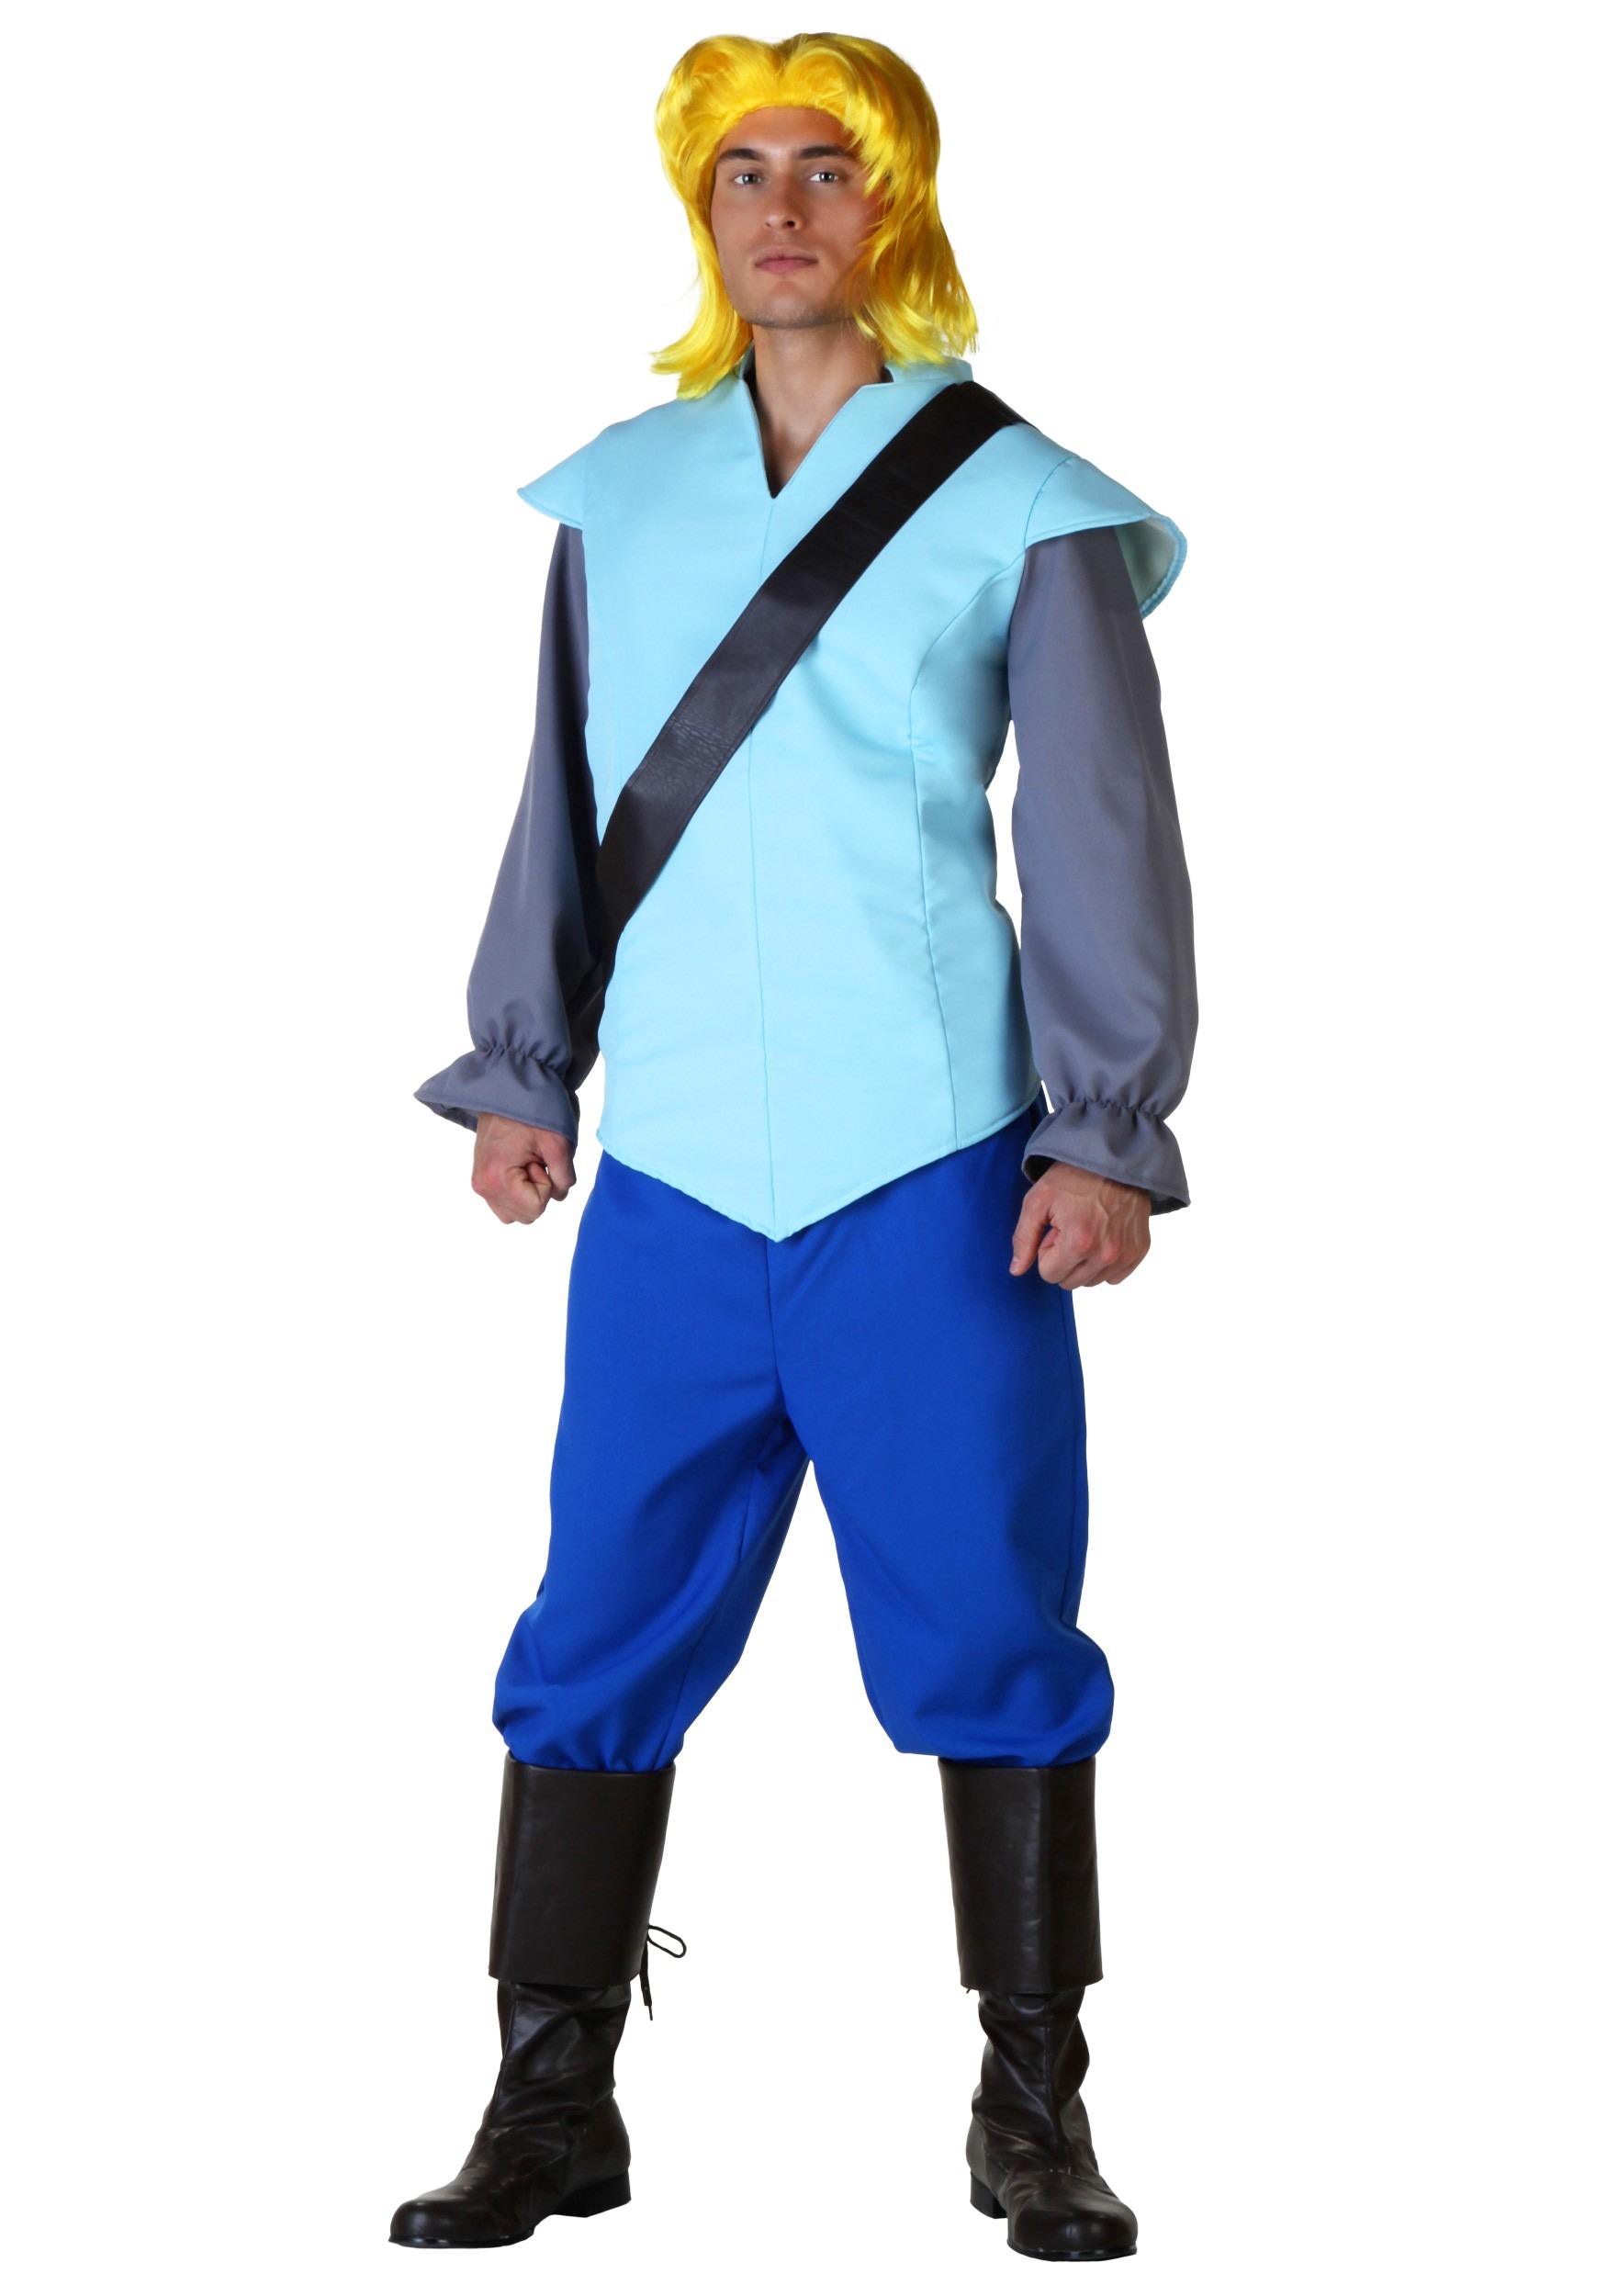 Plus Size John Smith Costume for Adults